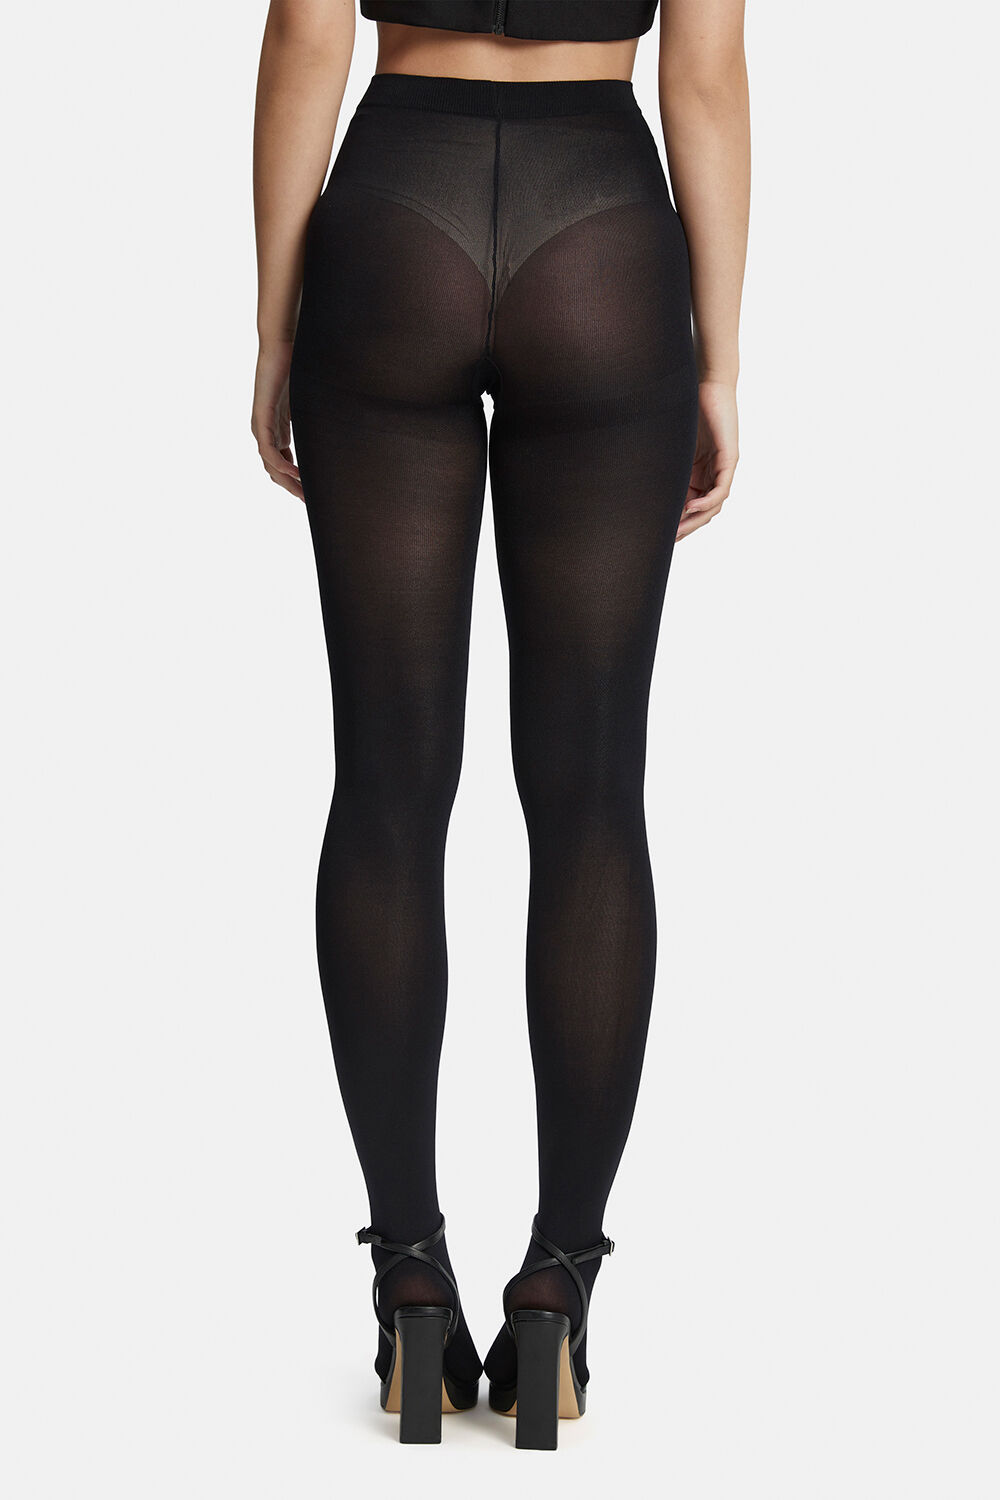 OPAQUE TIGHTS in colour METEORITE